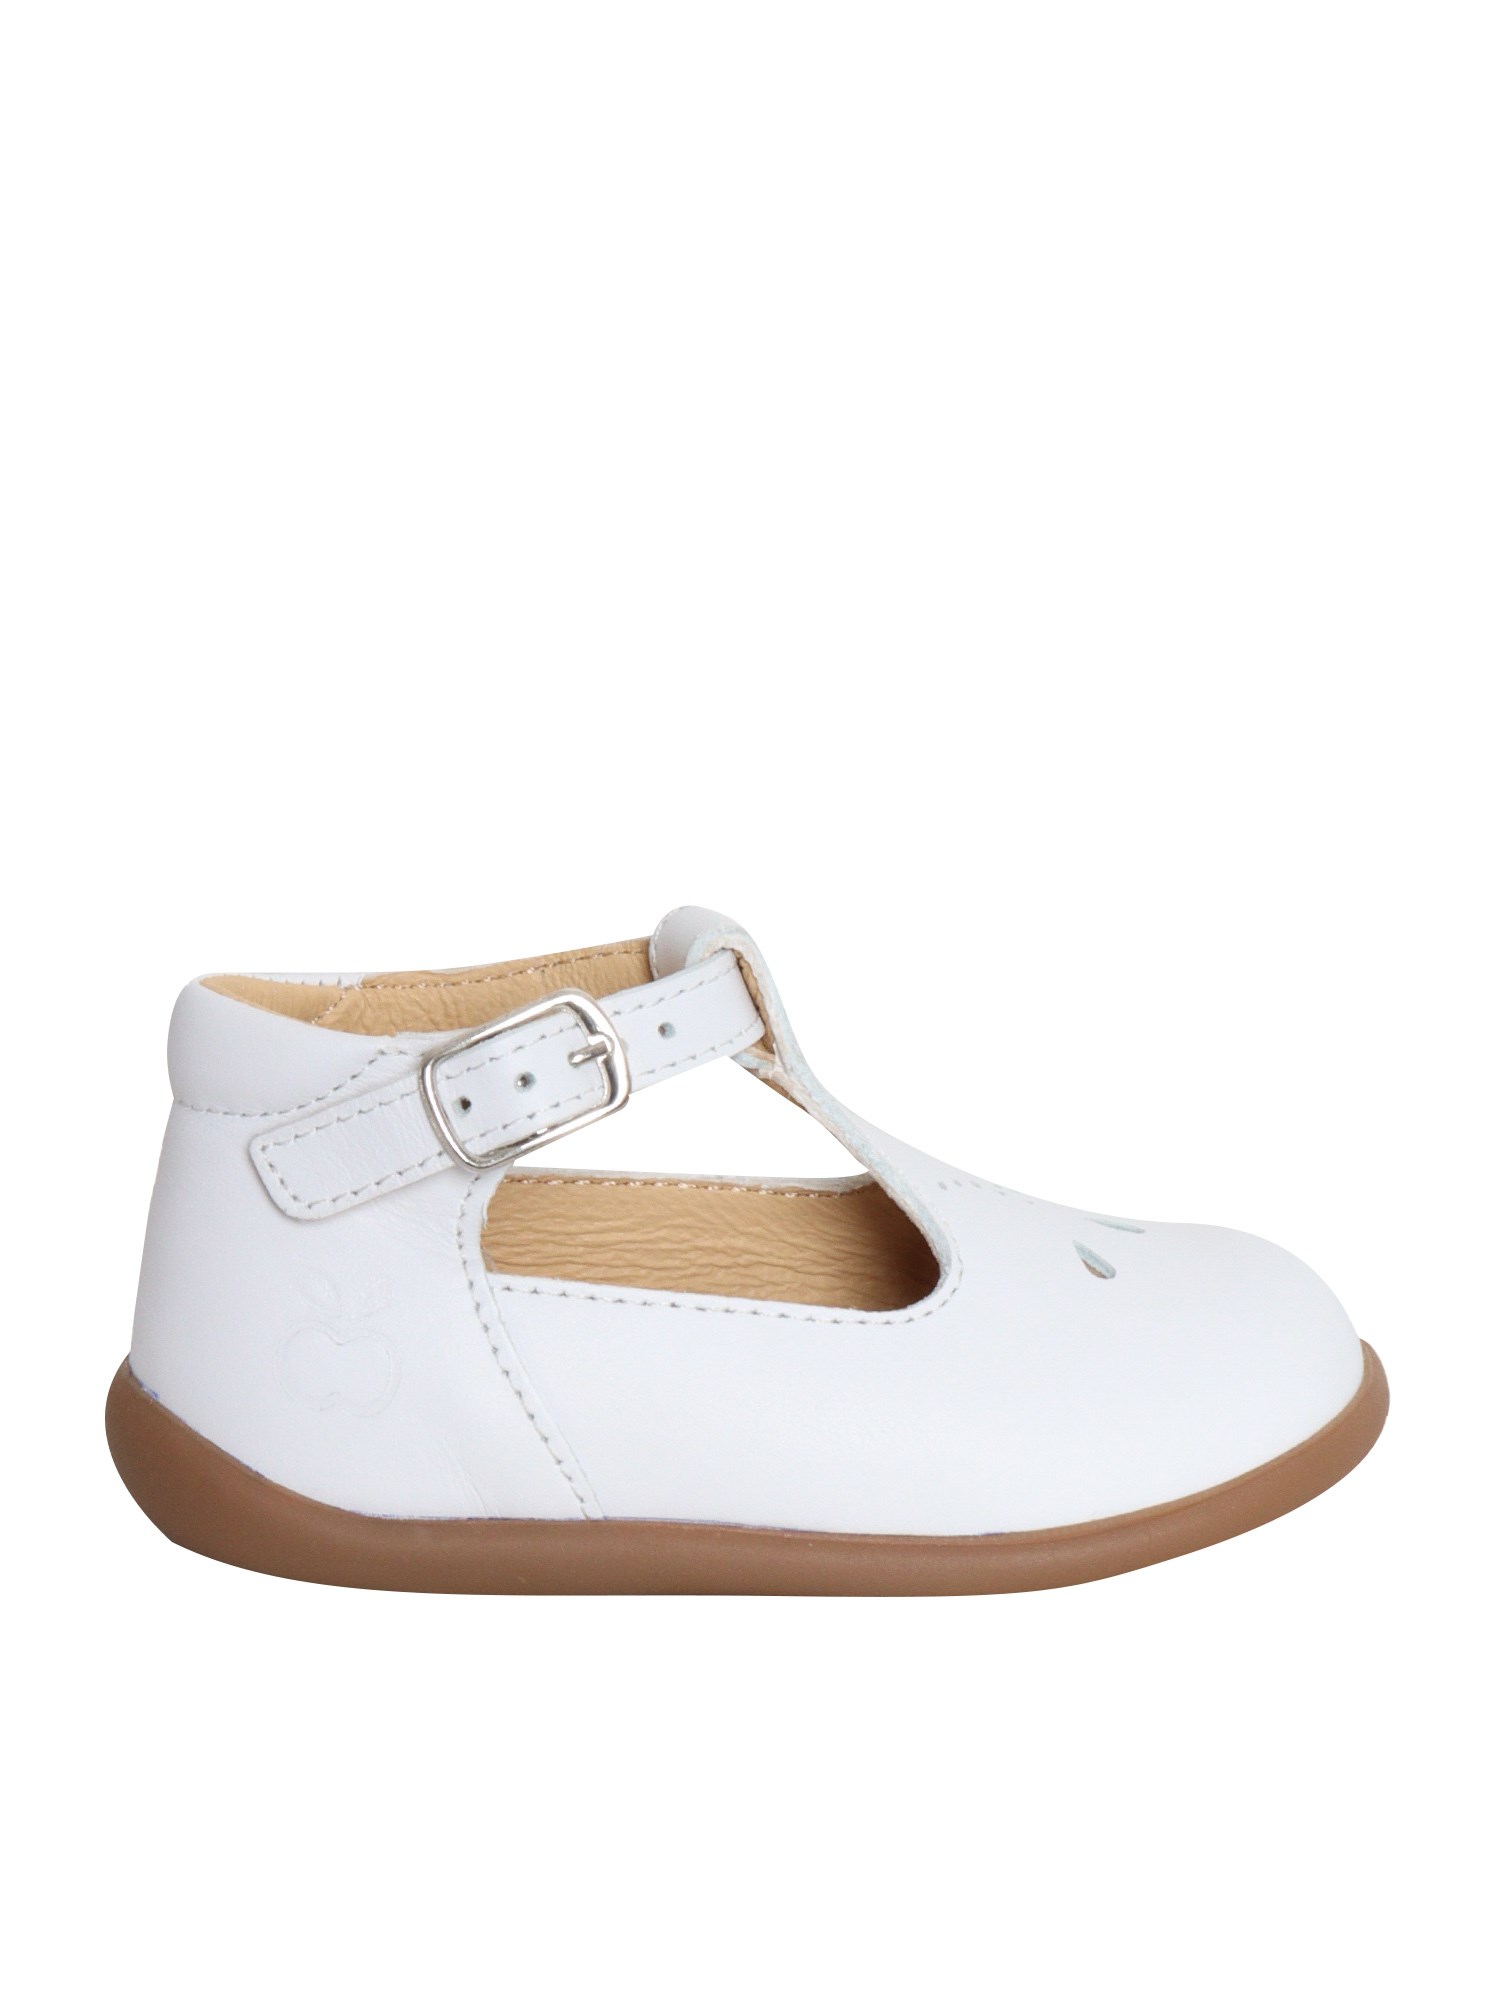 Pom D'api First Step Shoes In White